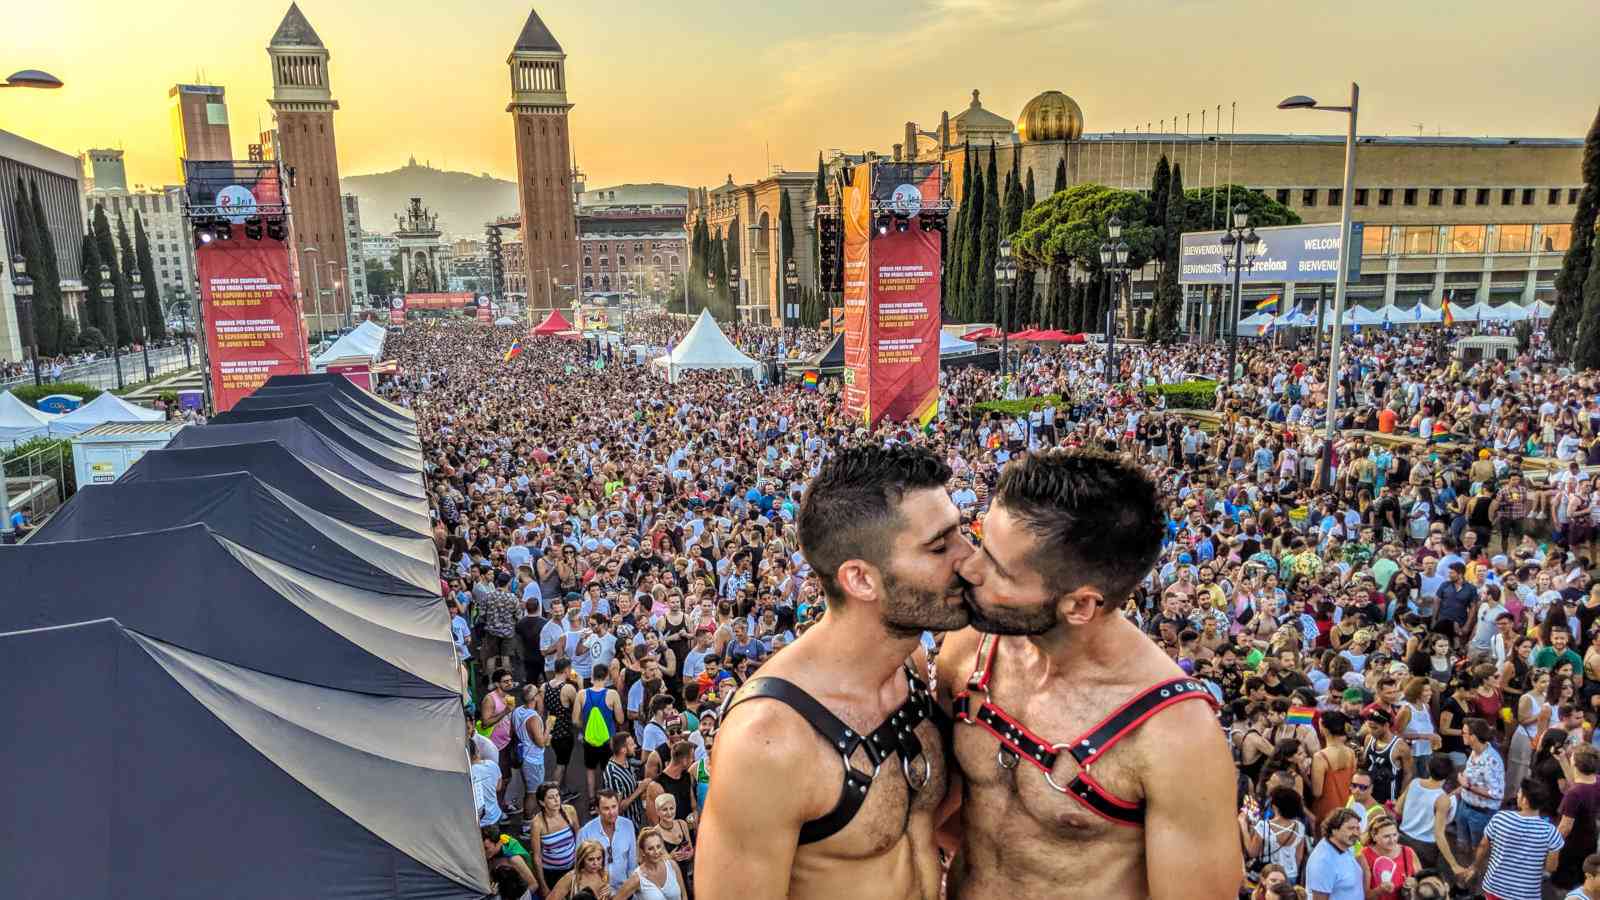 There are so many fun things to experience during Barcelona Pride, it's not just about the parade (although that is awesome).